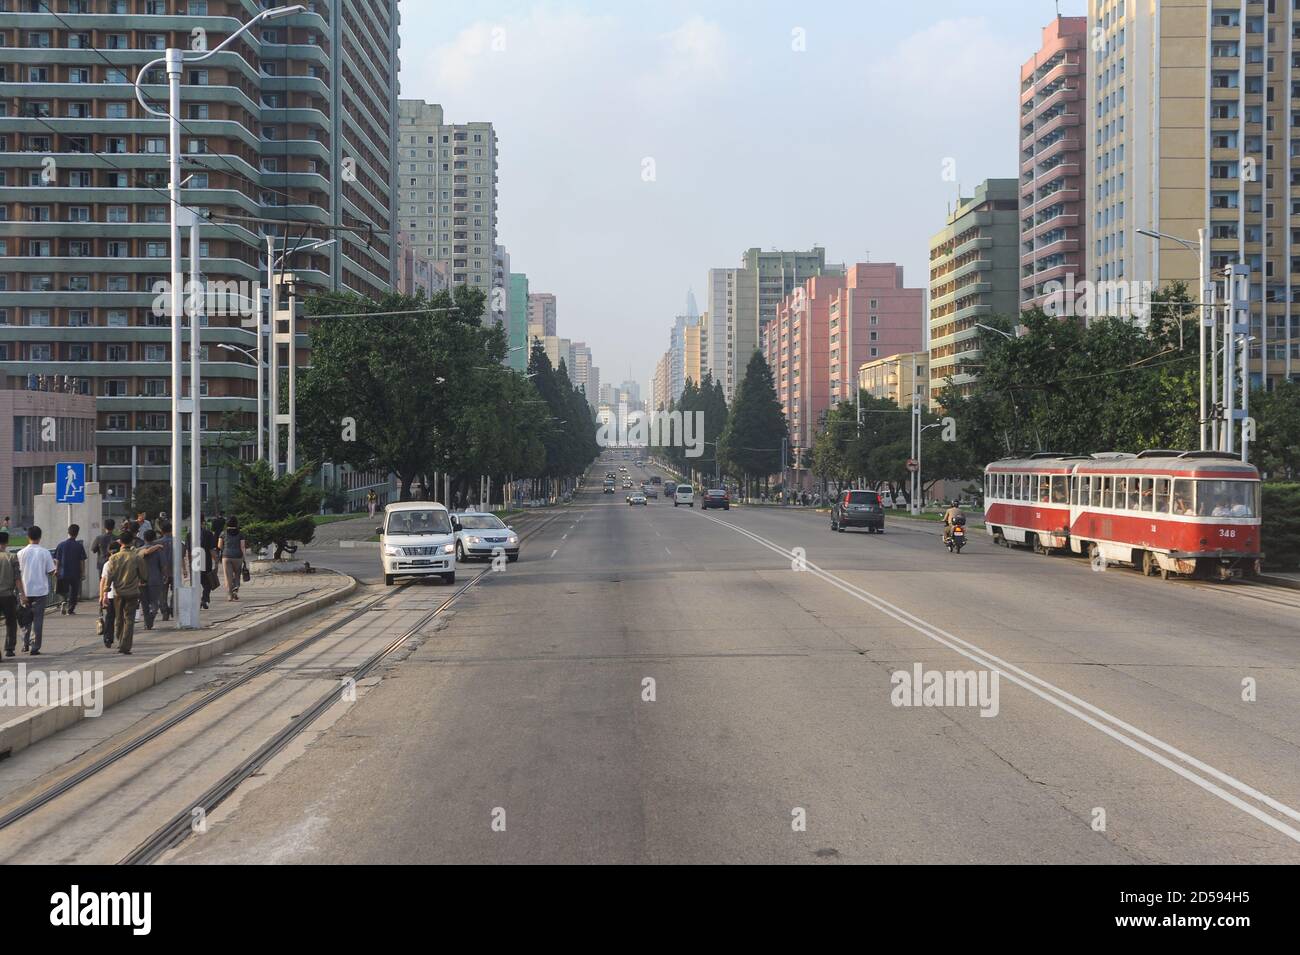 10.08.2012, Pyongyang, North Korea, Asia - An everyday street scene depicts a wide main road with traffic and residential high-rise buildings. Stock Photo